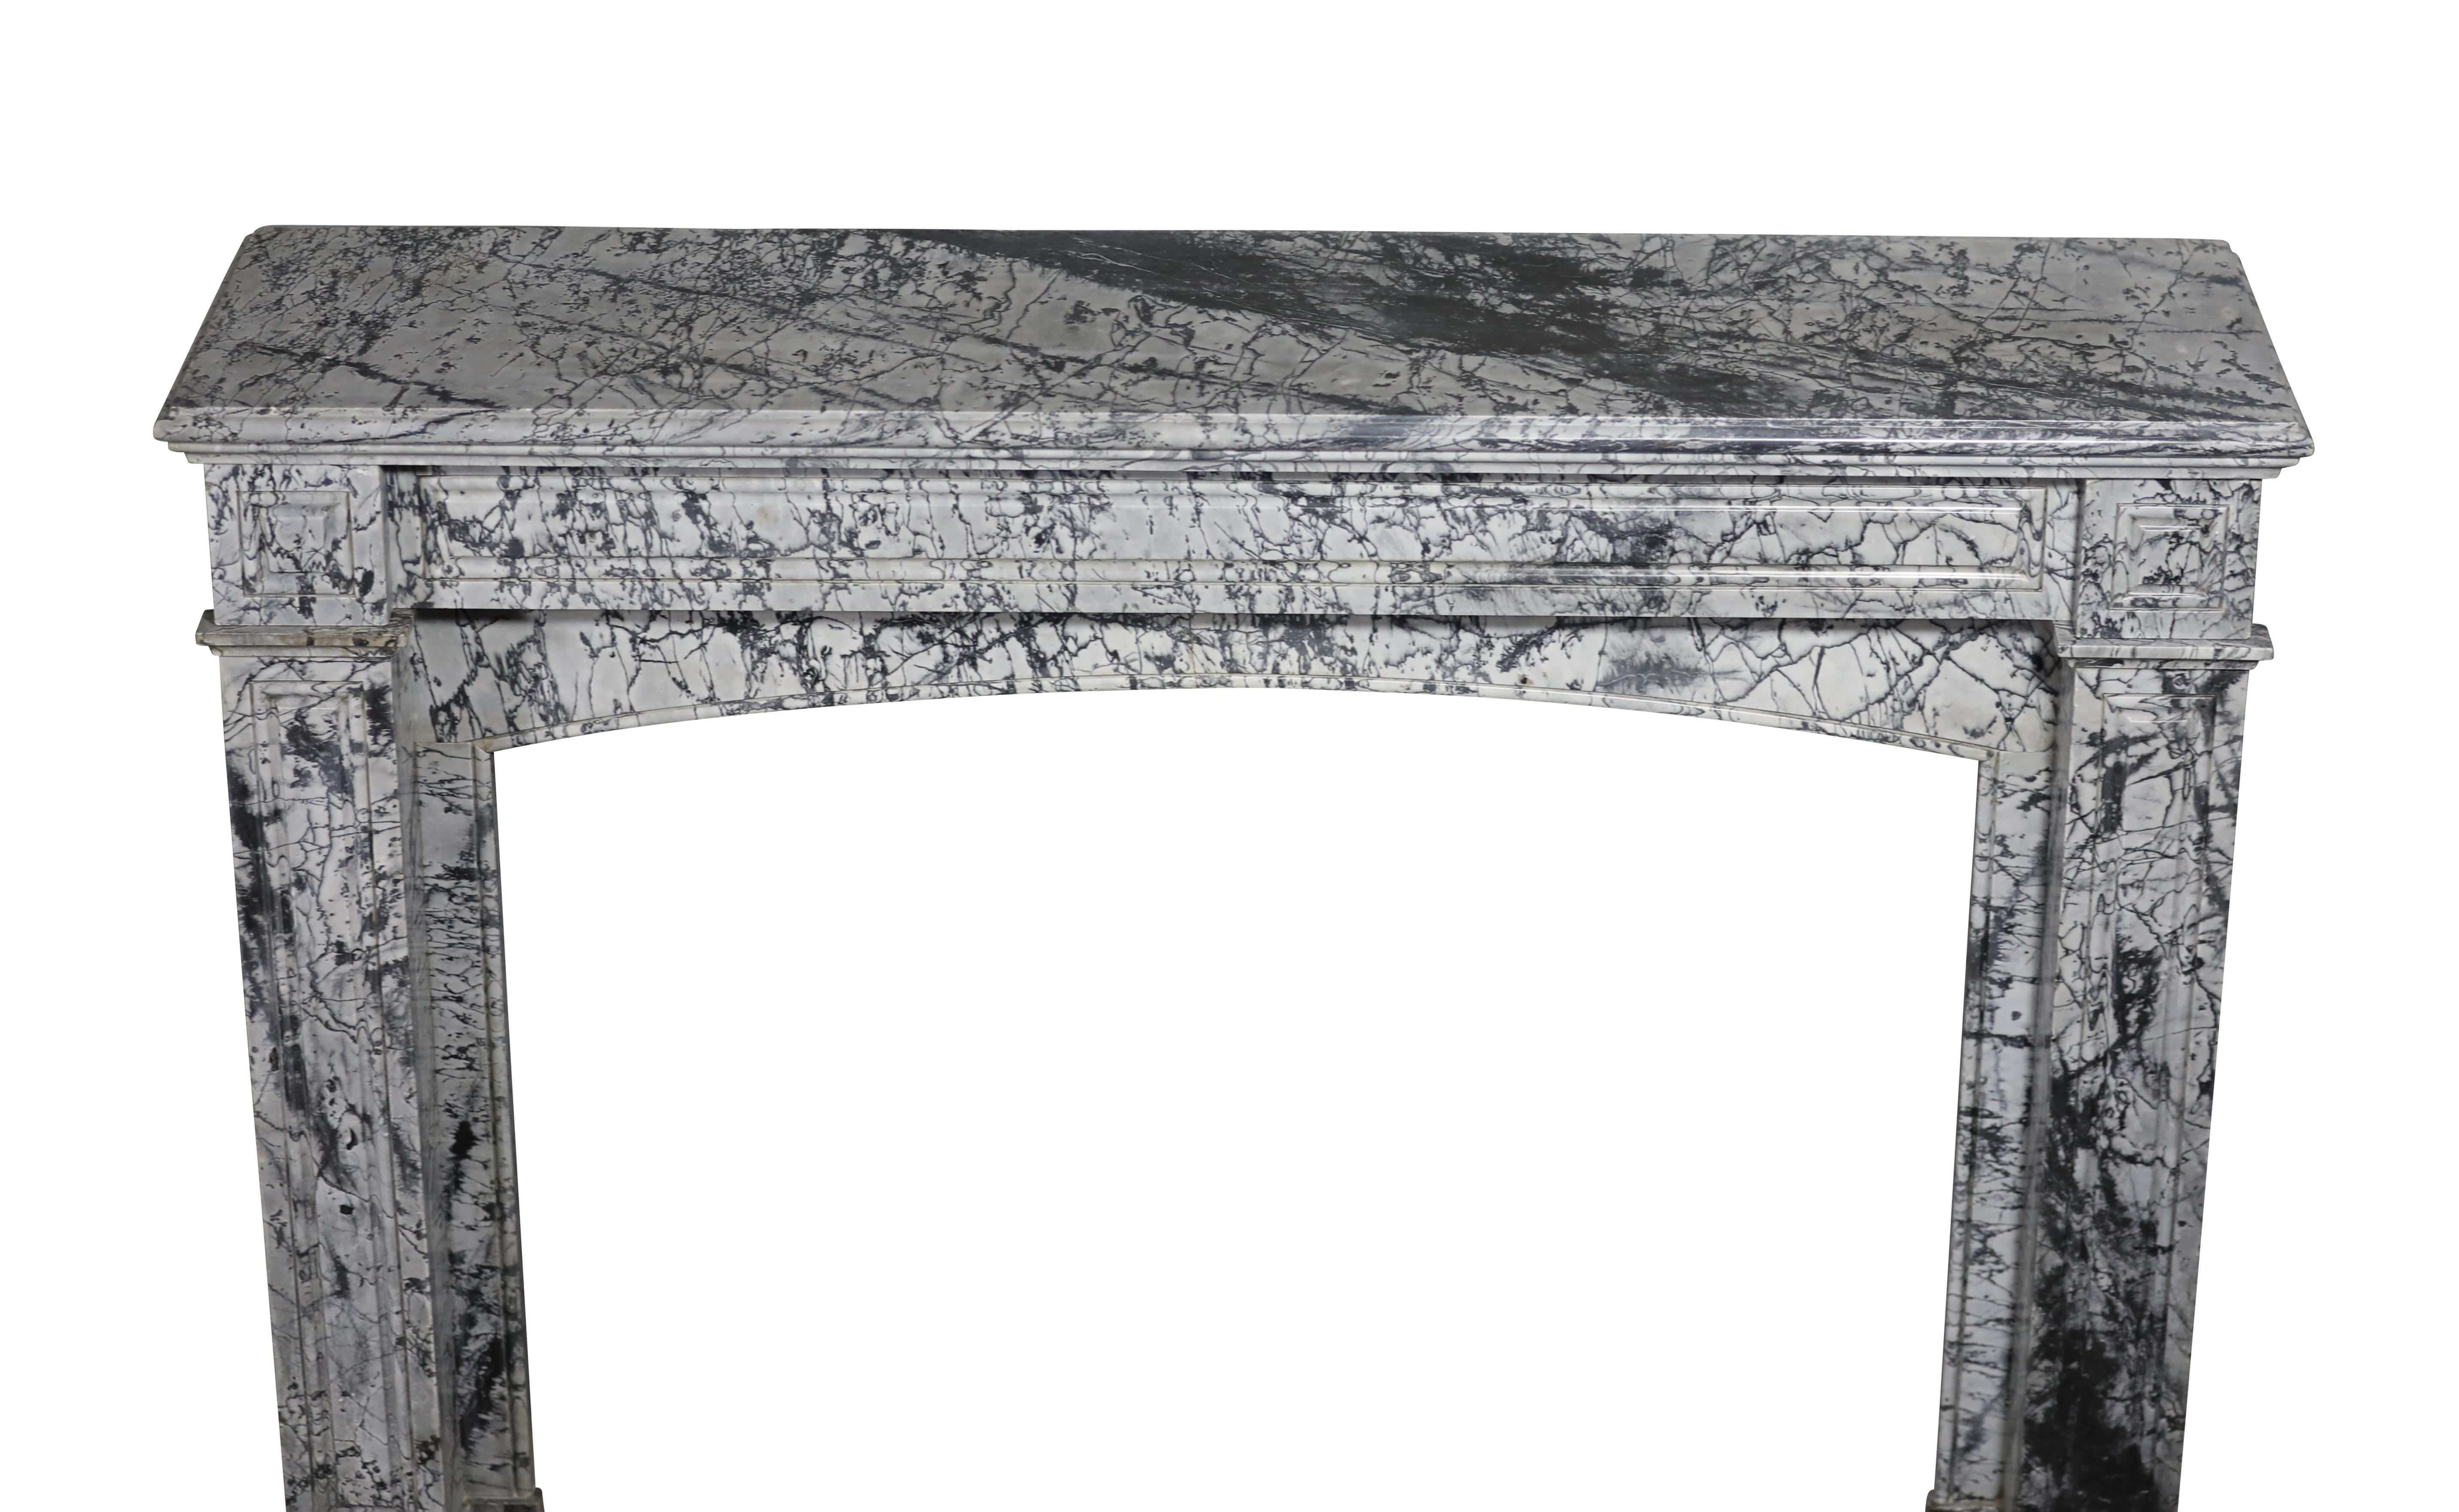 Bleu Turquin Marble Fireplace Surround In Great Condition For Timeless Design For Sale 10